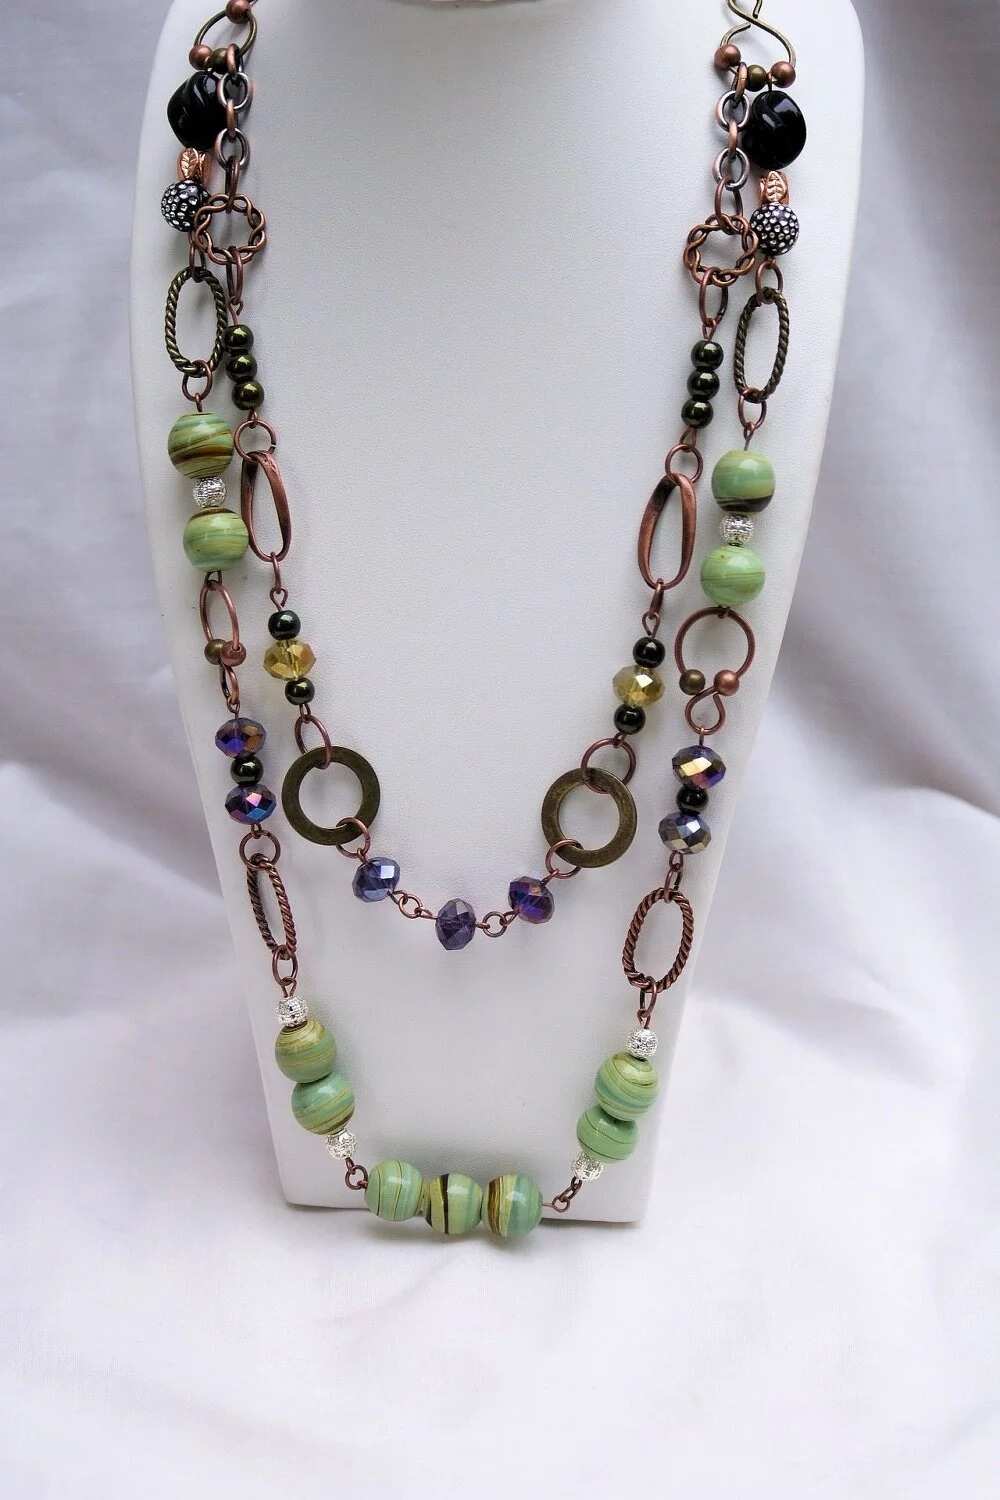 Chain and beads necklace